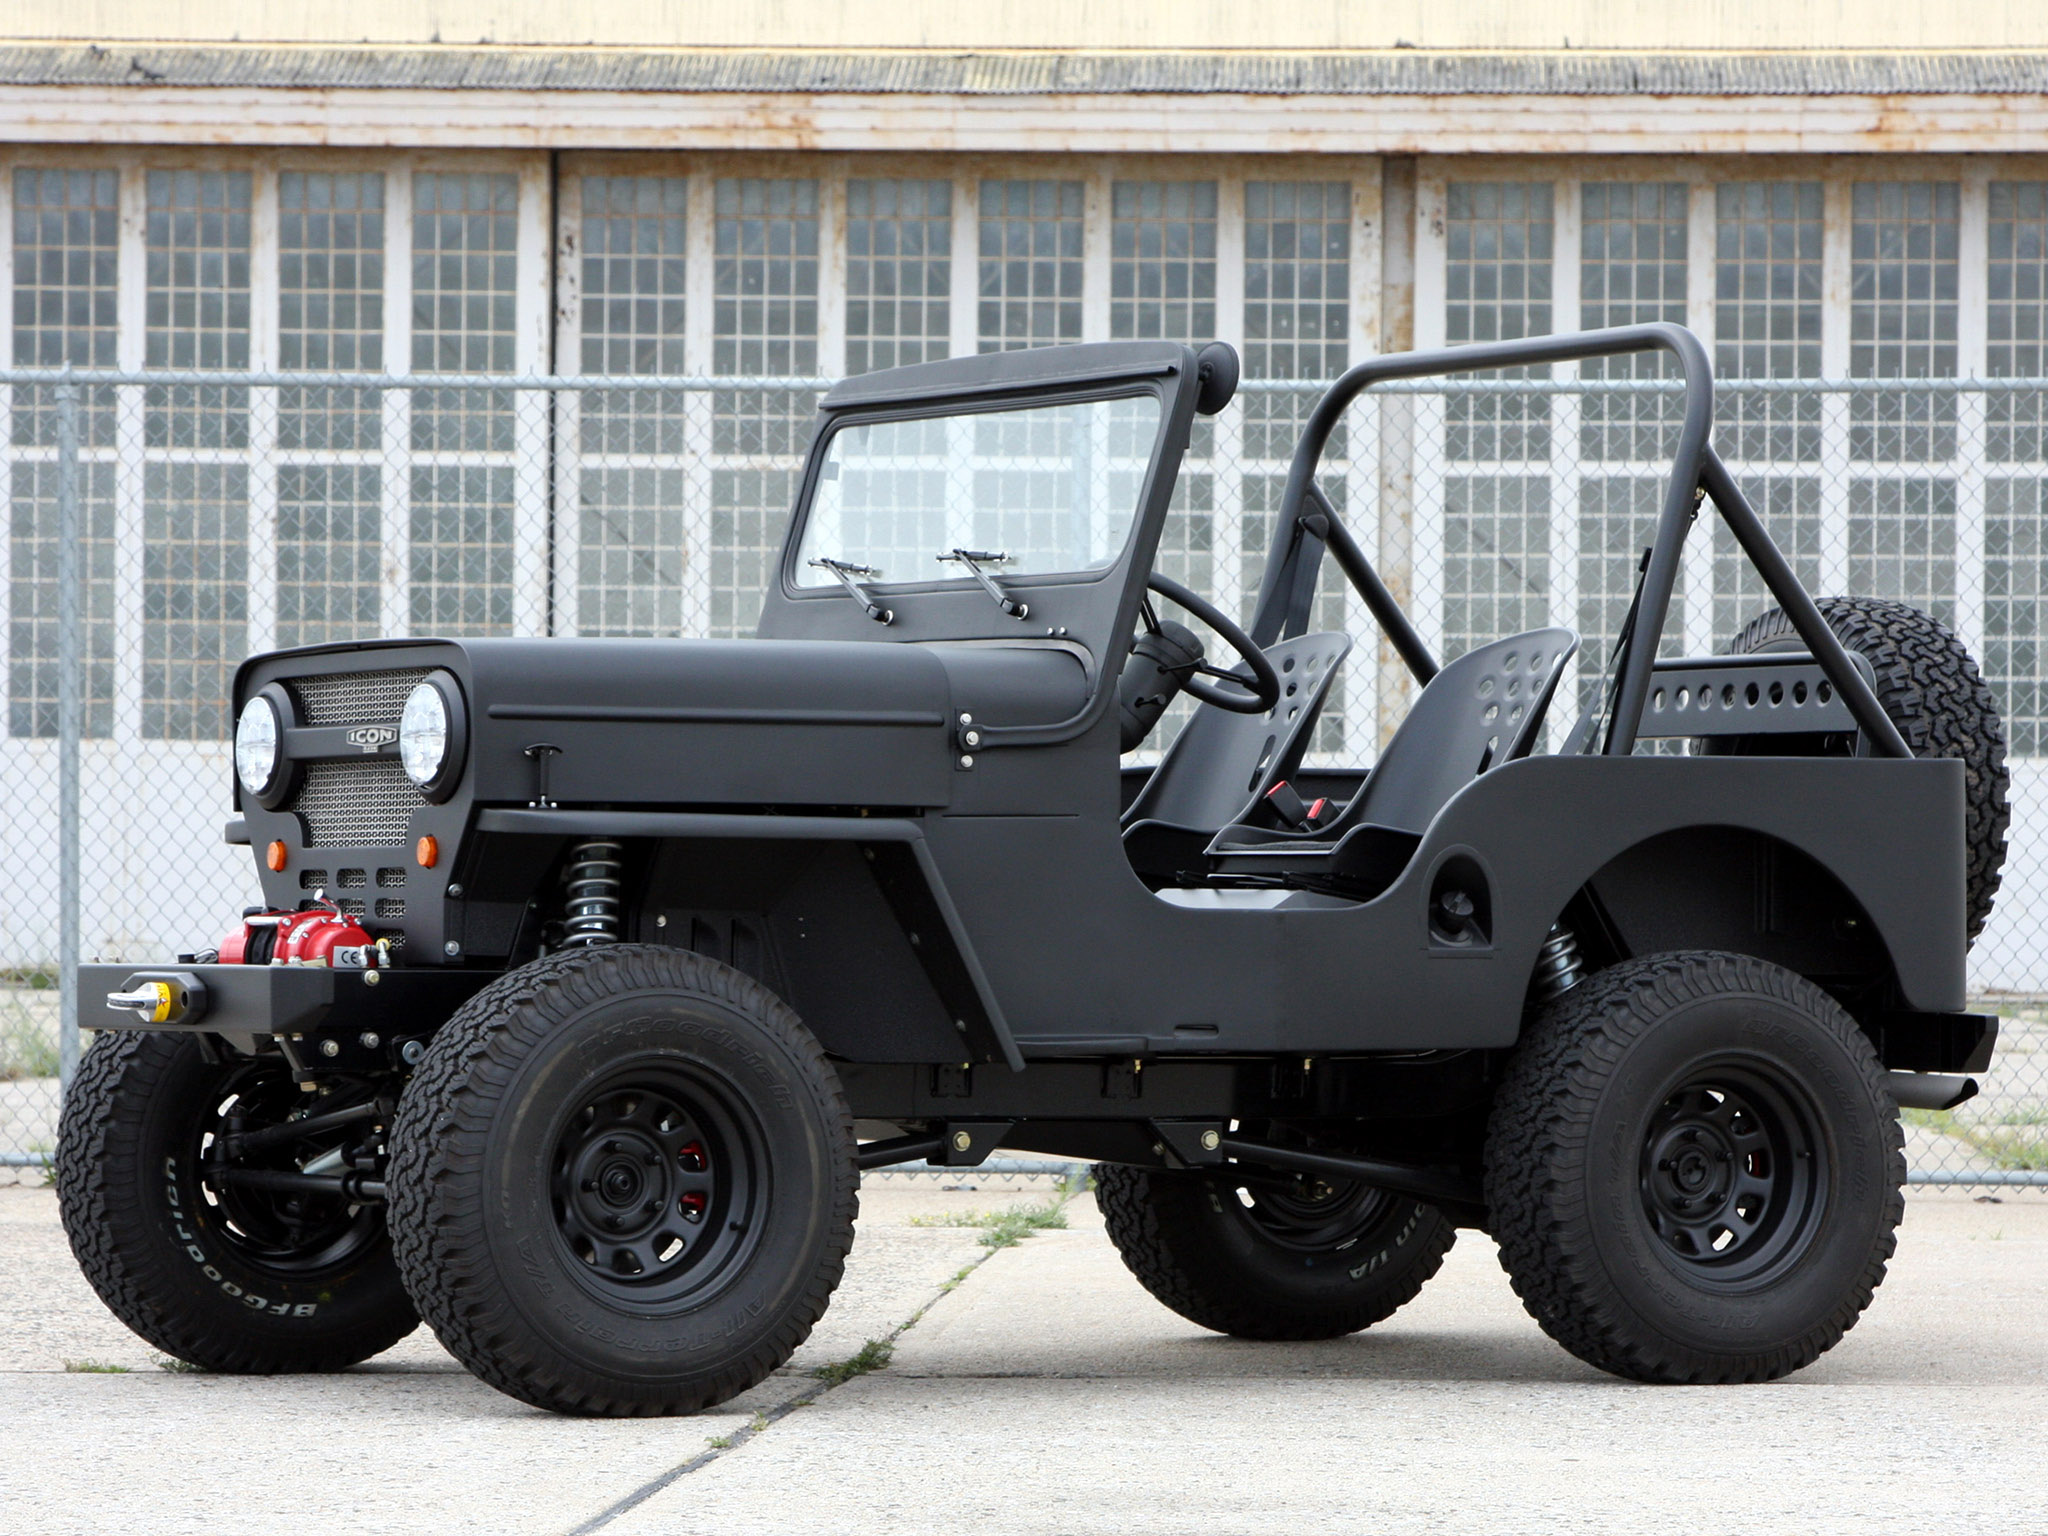 Jeep cj-3b. Amazing pictures & video to Jeep cj-3b. | Cars in India